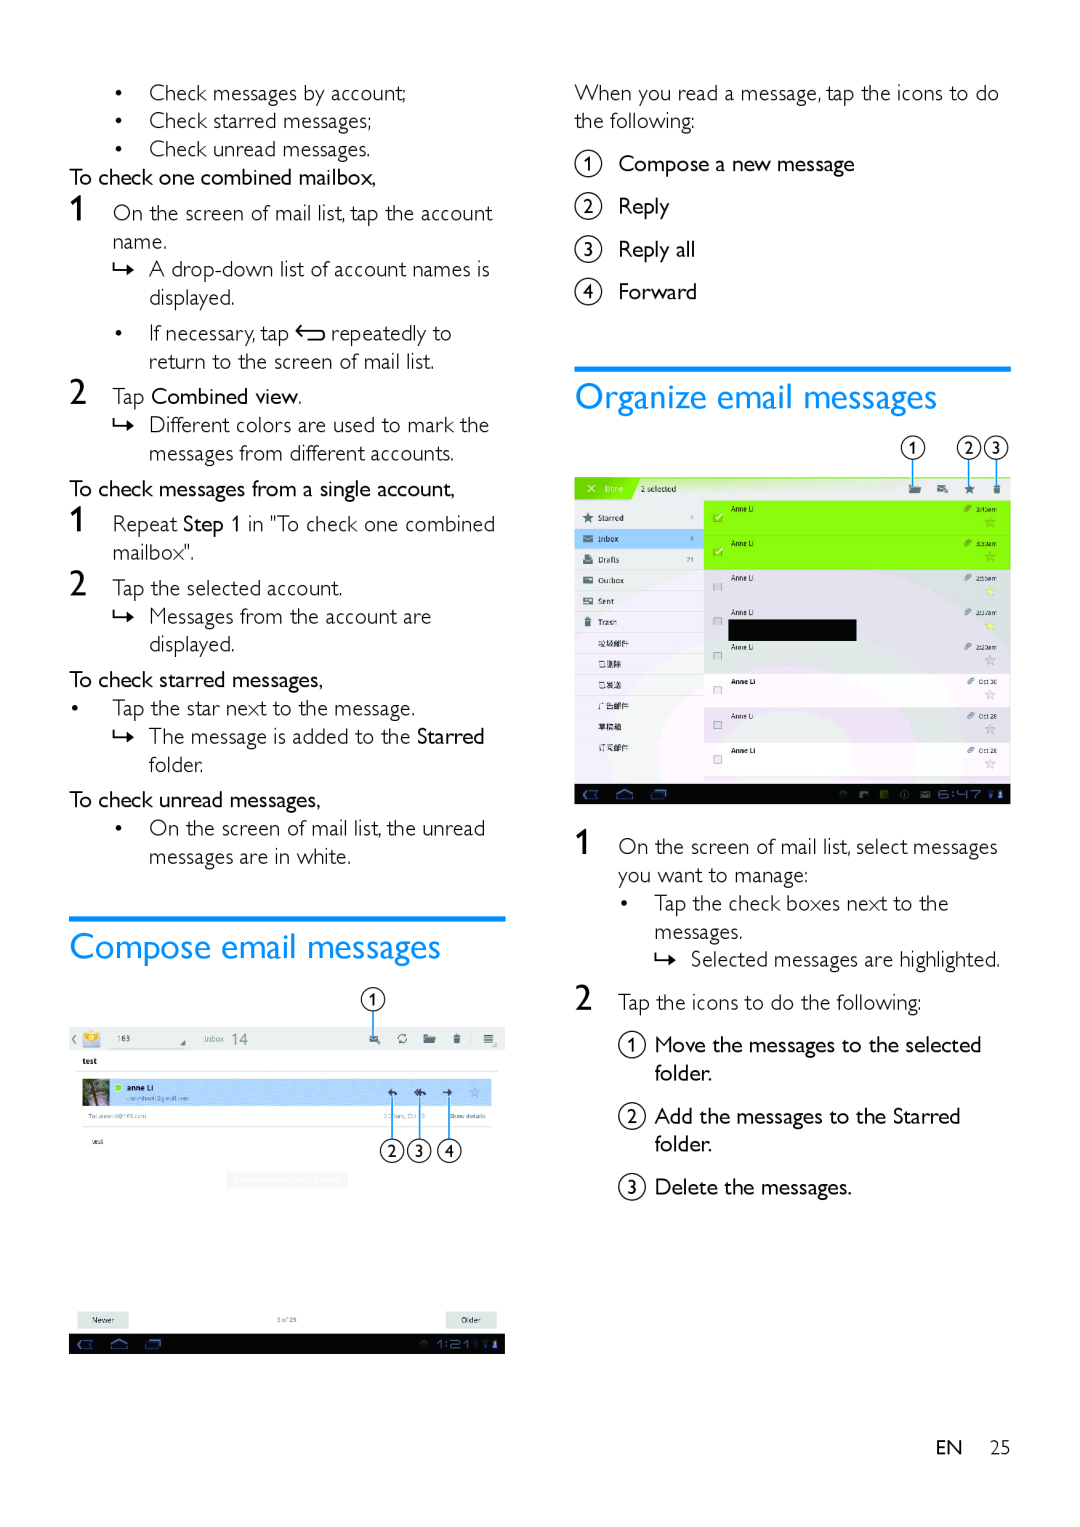 Philips PI3900 manual Compose email messages, Organize email messages 